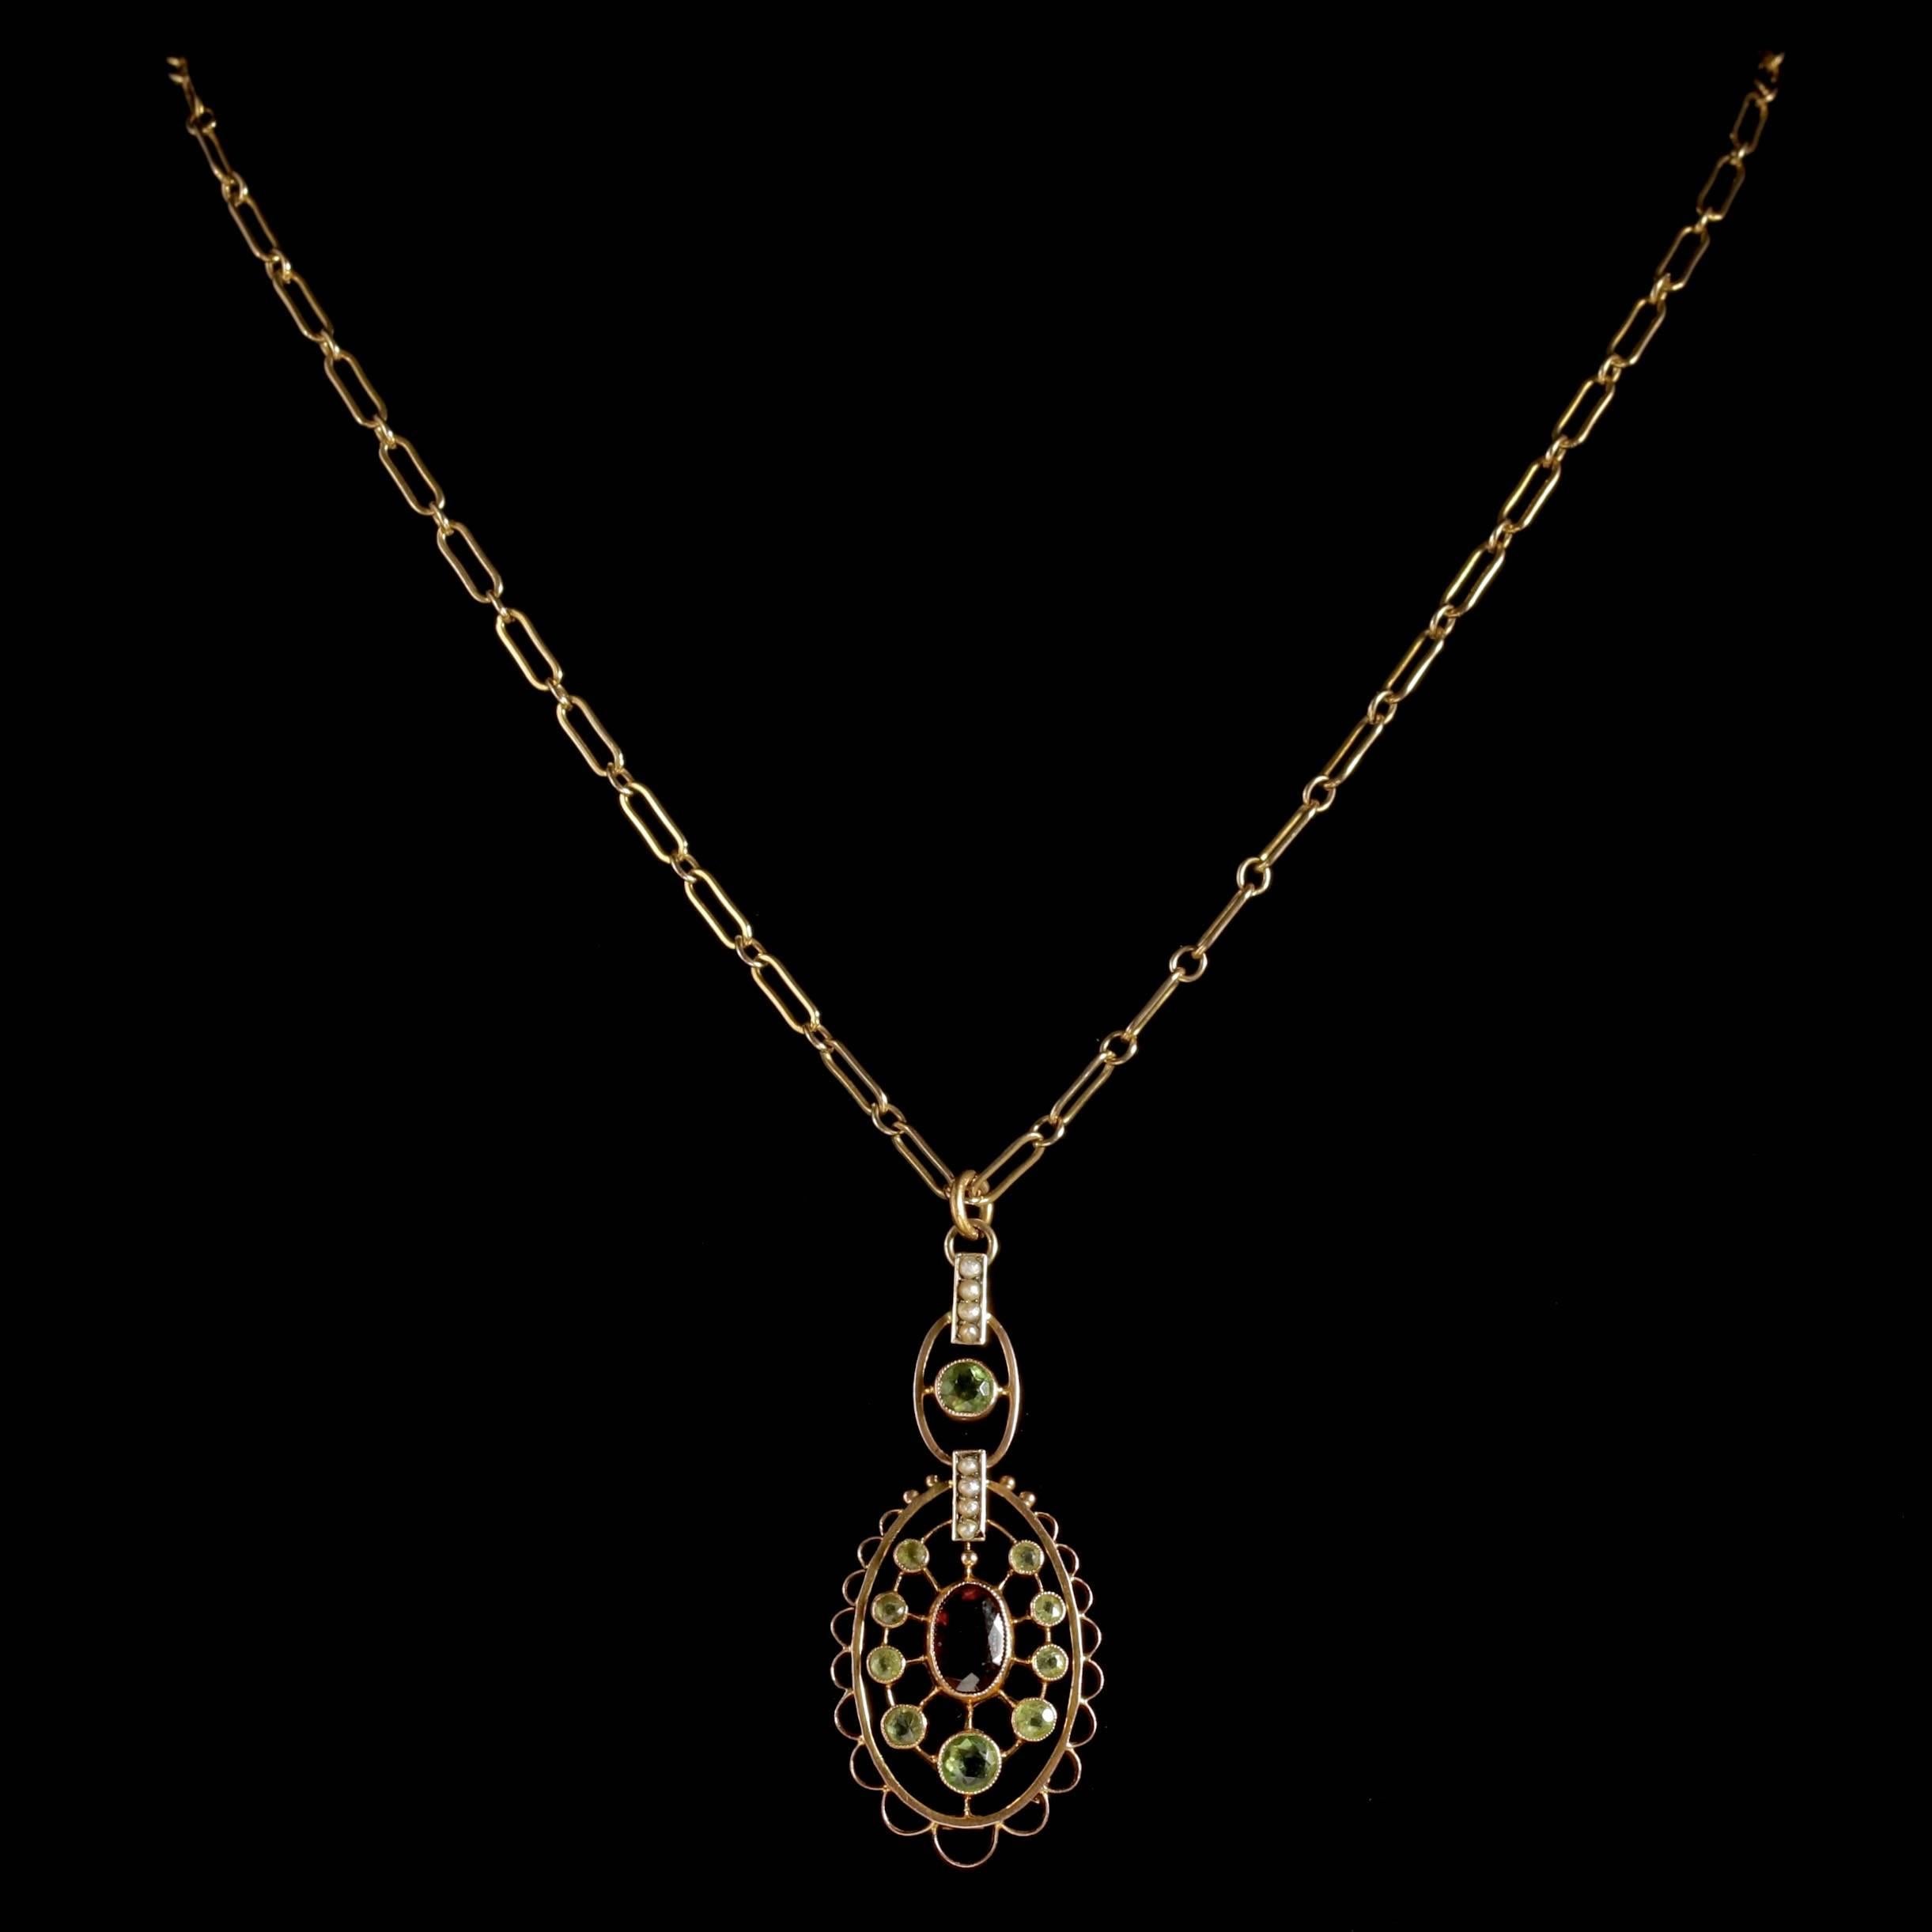 To read more please click continue reading below-

This lovely antique 9ct Gold Suffragette pendant necklace is genuine Victorian Circa 1900.

Emmeline Pankhurst was the leader of the British Suffragette movement in the 19th century and through her